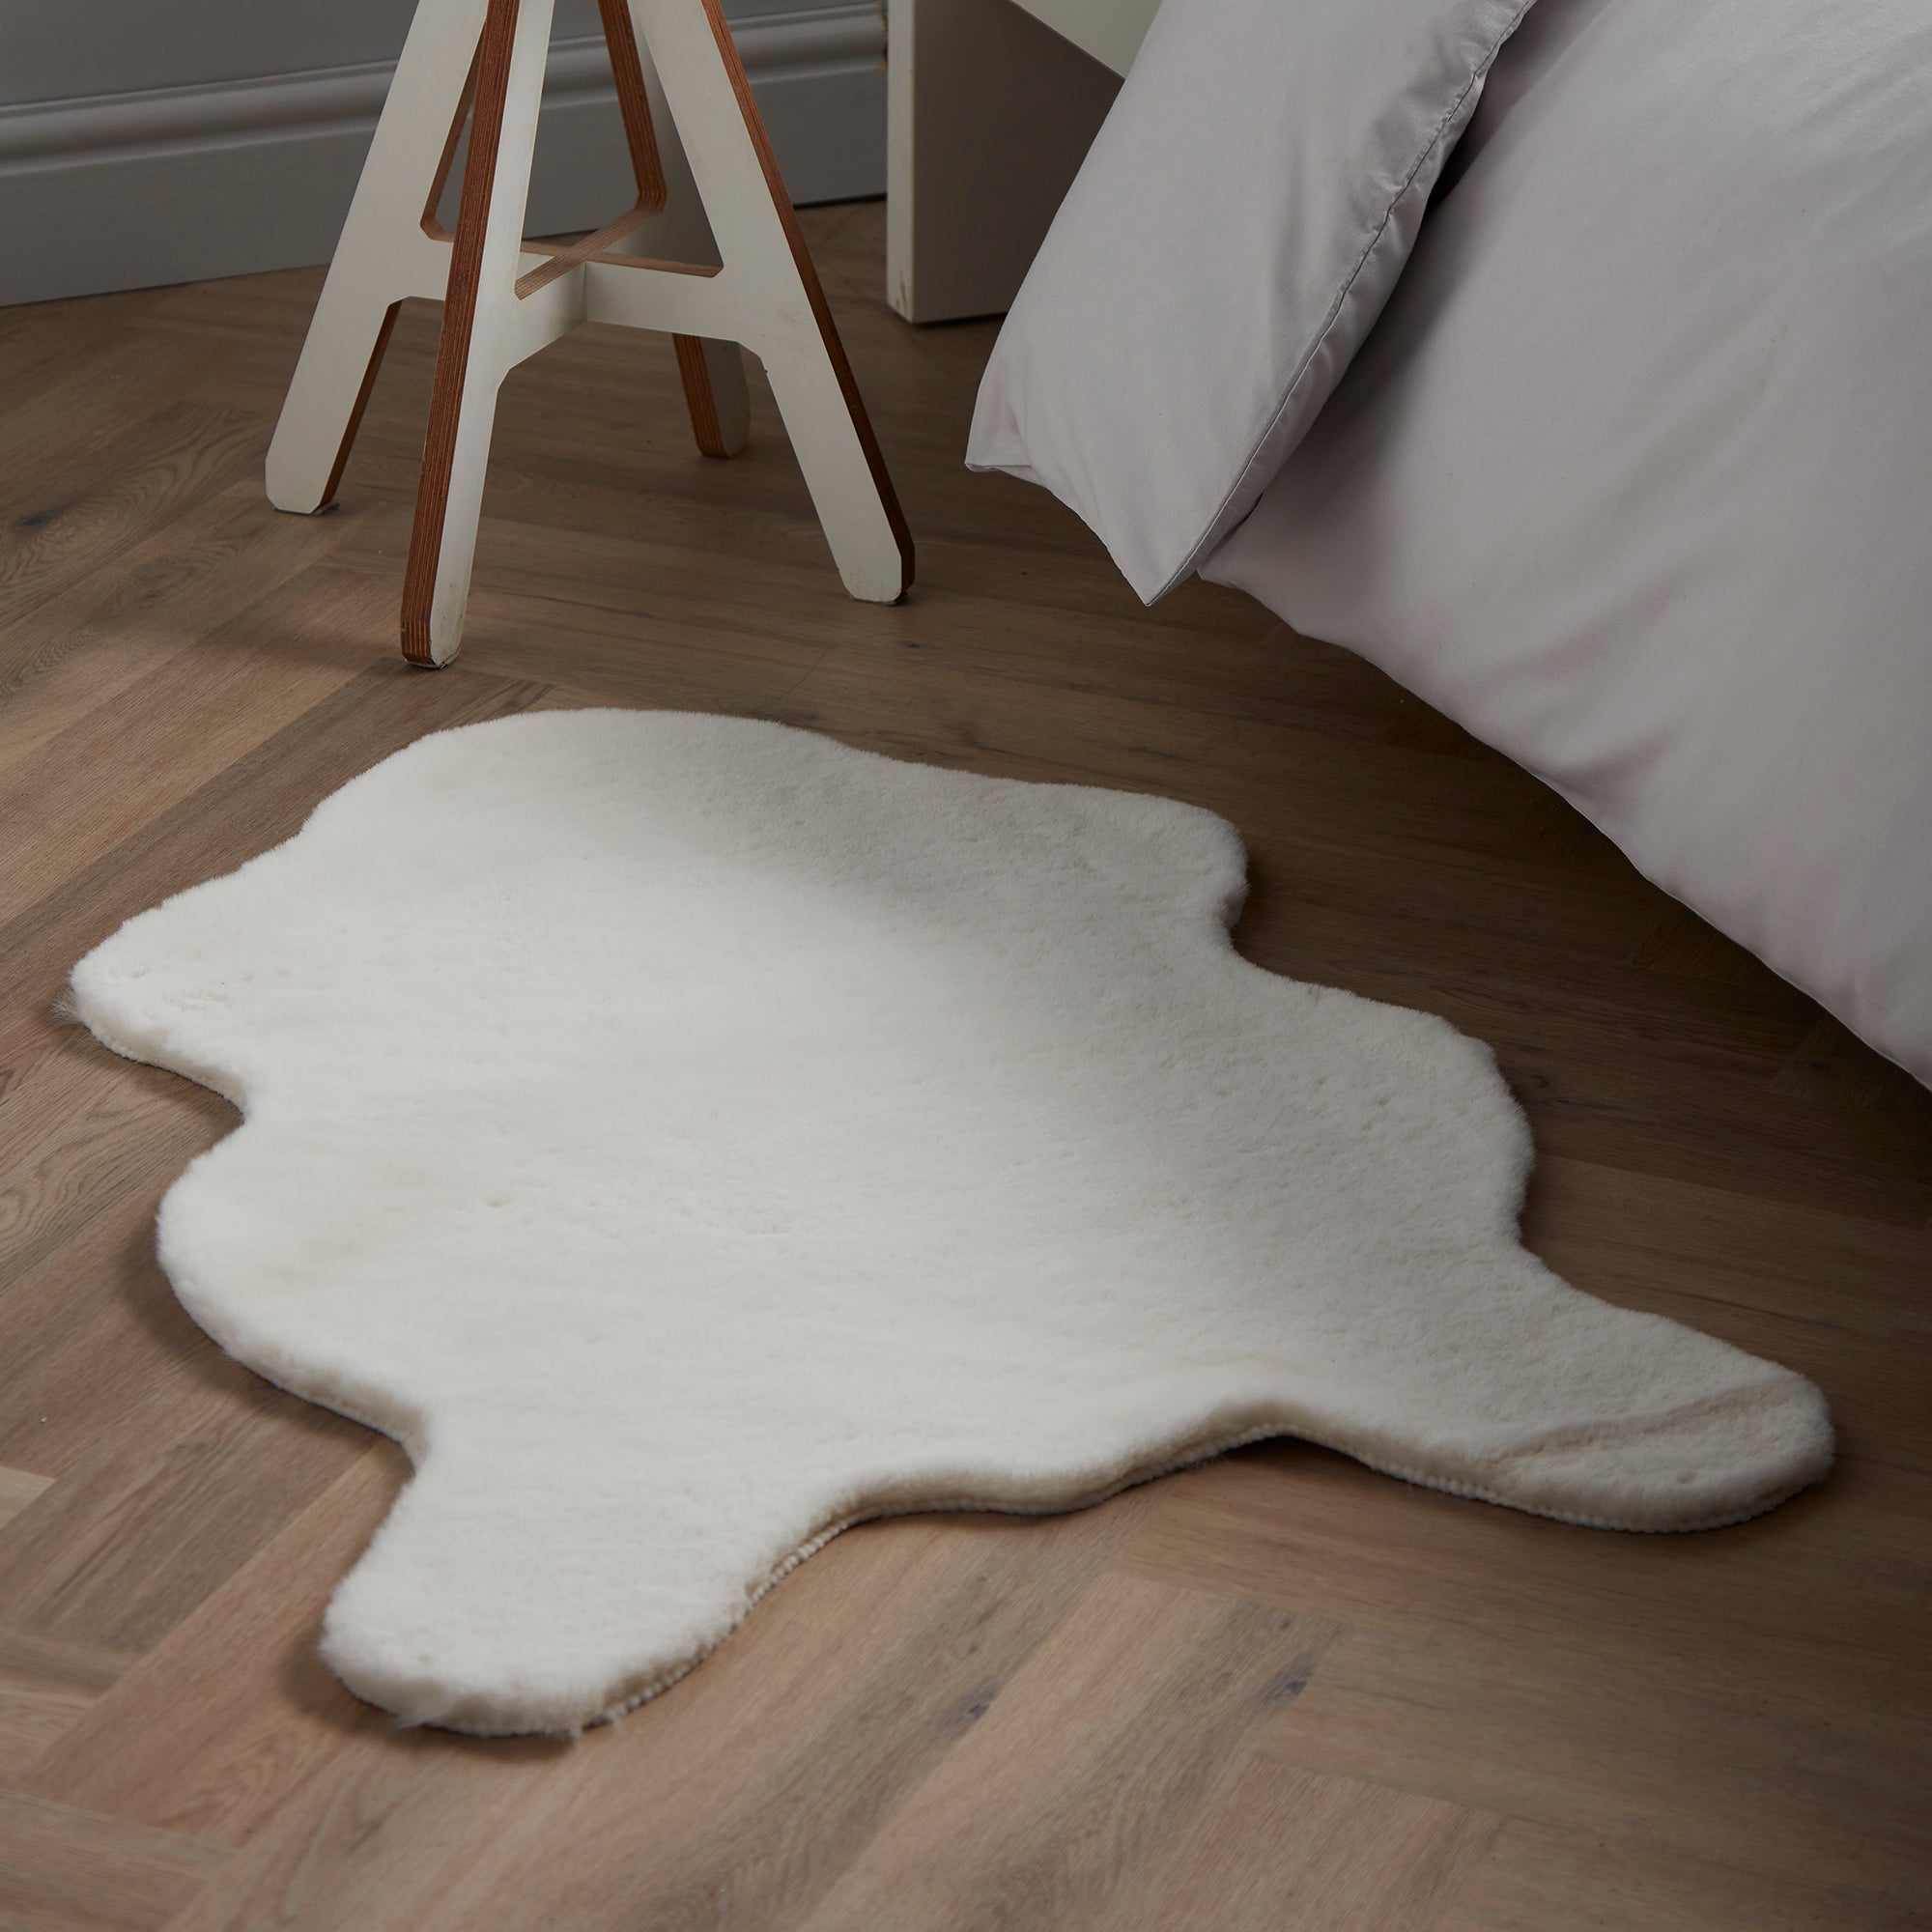 Shaped Rug - Faux Fur Shaped Rug in Ivory - by Fusion